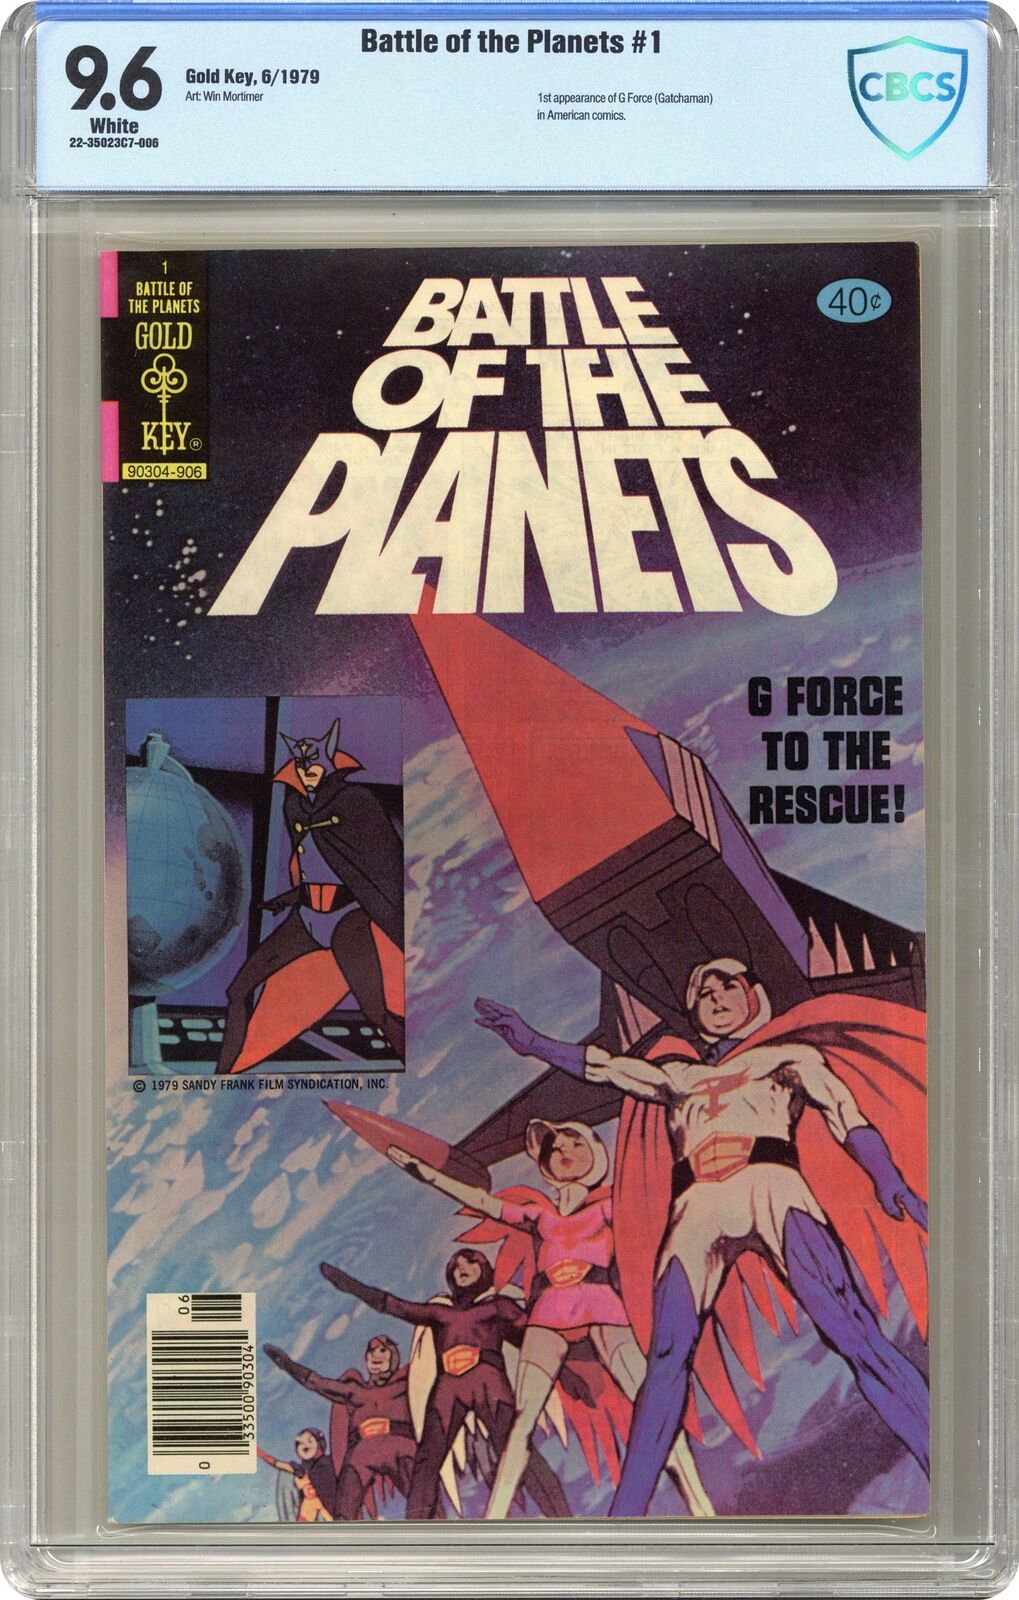 Battle of the Planets #1 CBCS 9.6 1979 Gold Key 22-35023C7-006